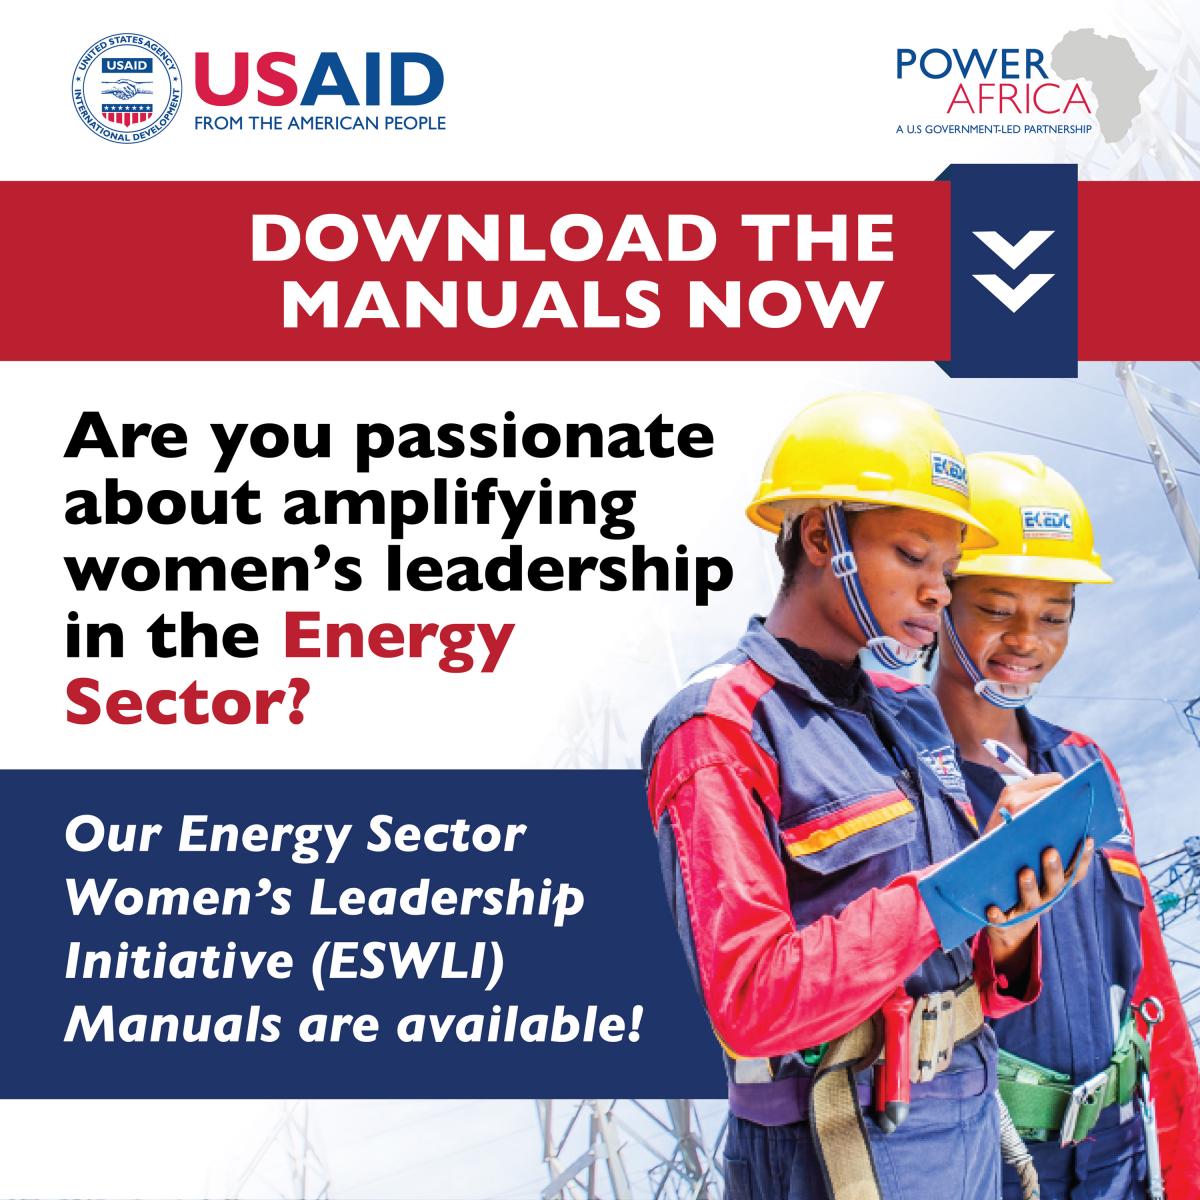  Energy Sector Women’s Leadership Initiative square banner